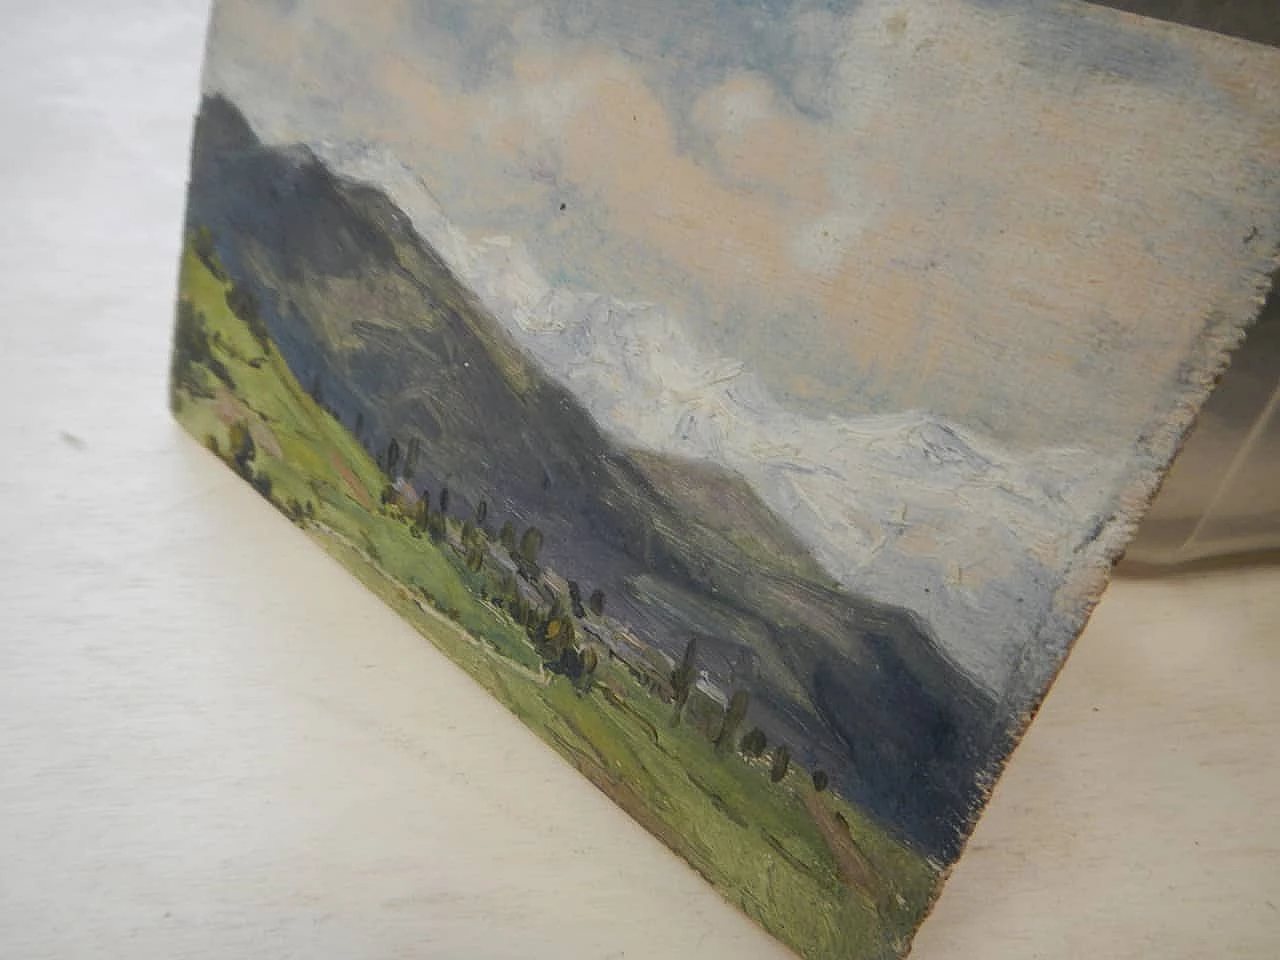 Des Champs, Pyrenees, painting on wood, early 20th century 6